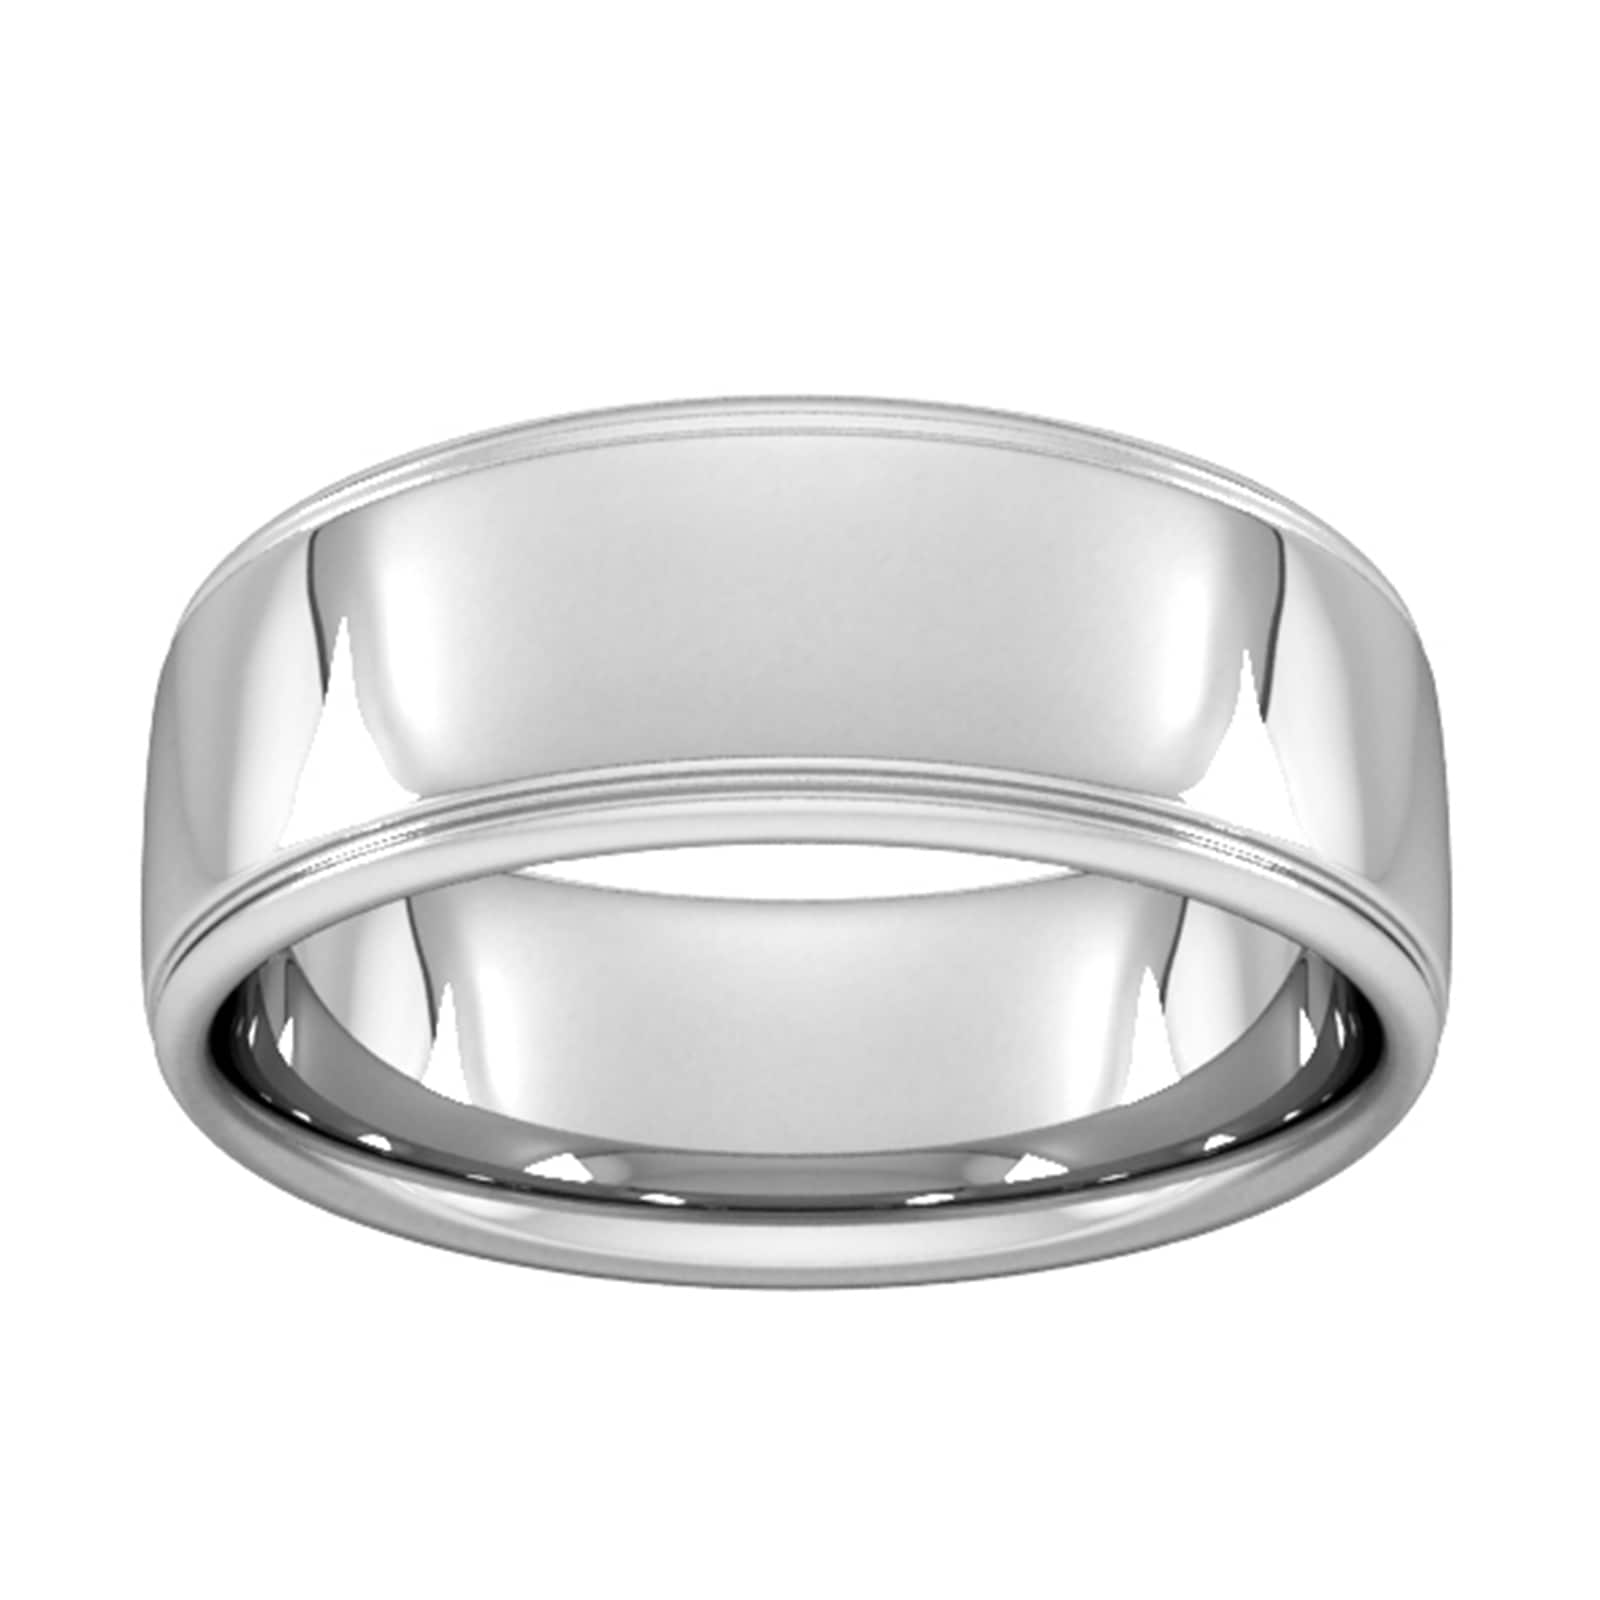 8mm Slight Court Heavy Polished Finish With Grooves Wedding Ring In Platinum - Ring Size Q